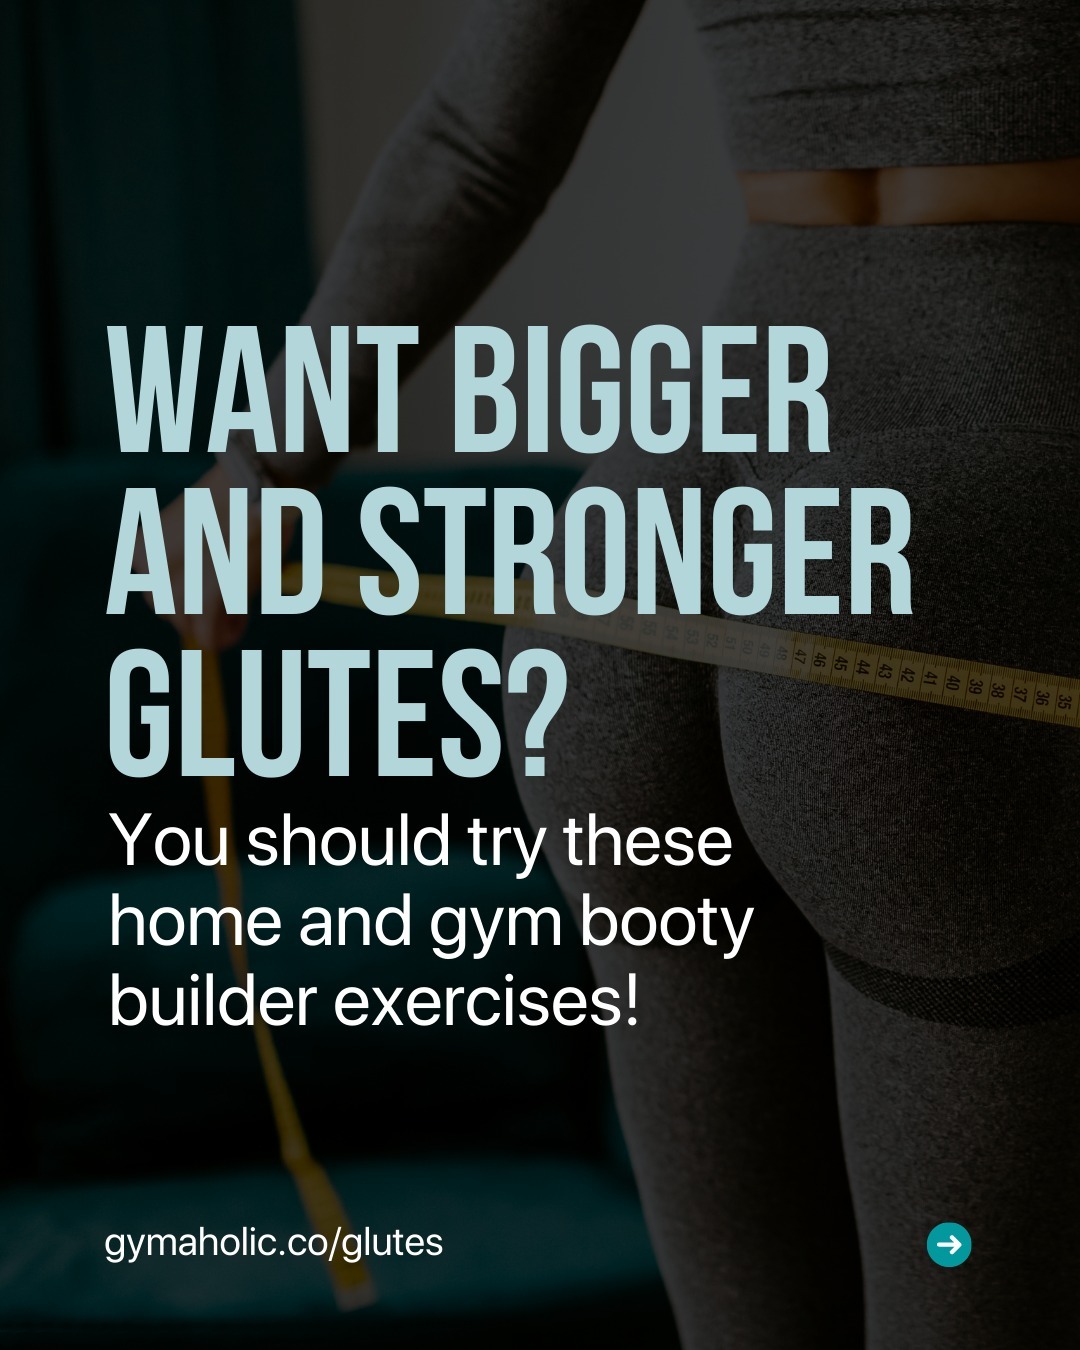 Want bigger and stronger glutes?